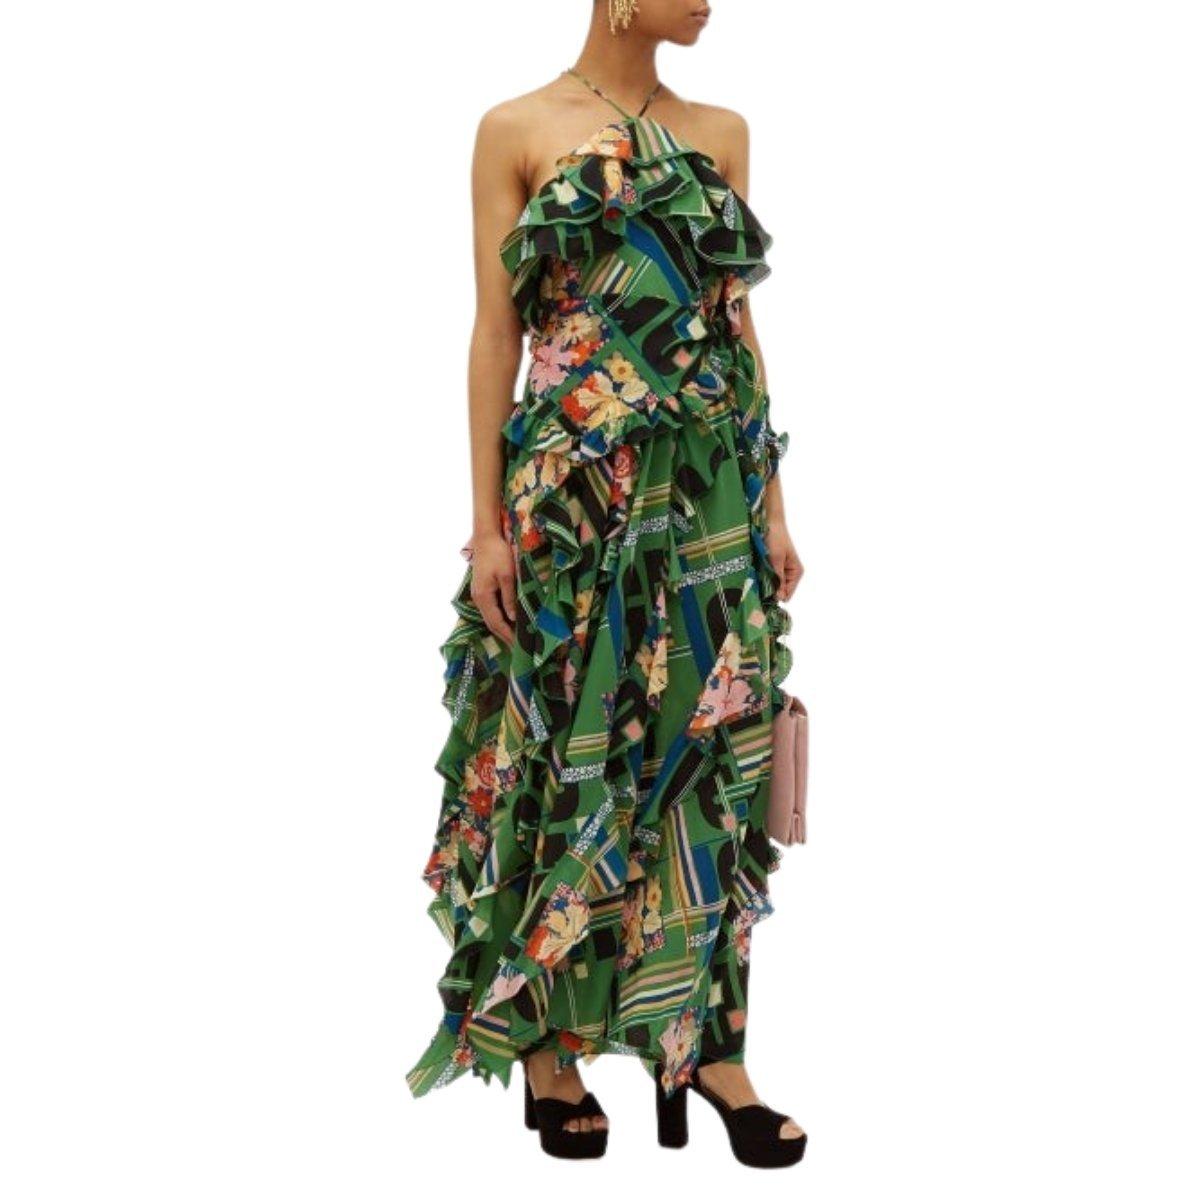 Ornamental green silk-crepe gown, capturing the Gucci's talent for richly textured and patterned eveningwear. 
Depicting contrasting florals, graphic checks and the house's signature logo lettering, it's crafted in Italy to a retro halterneck